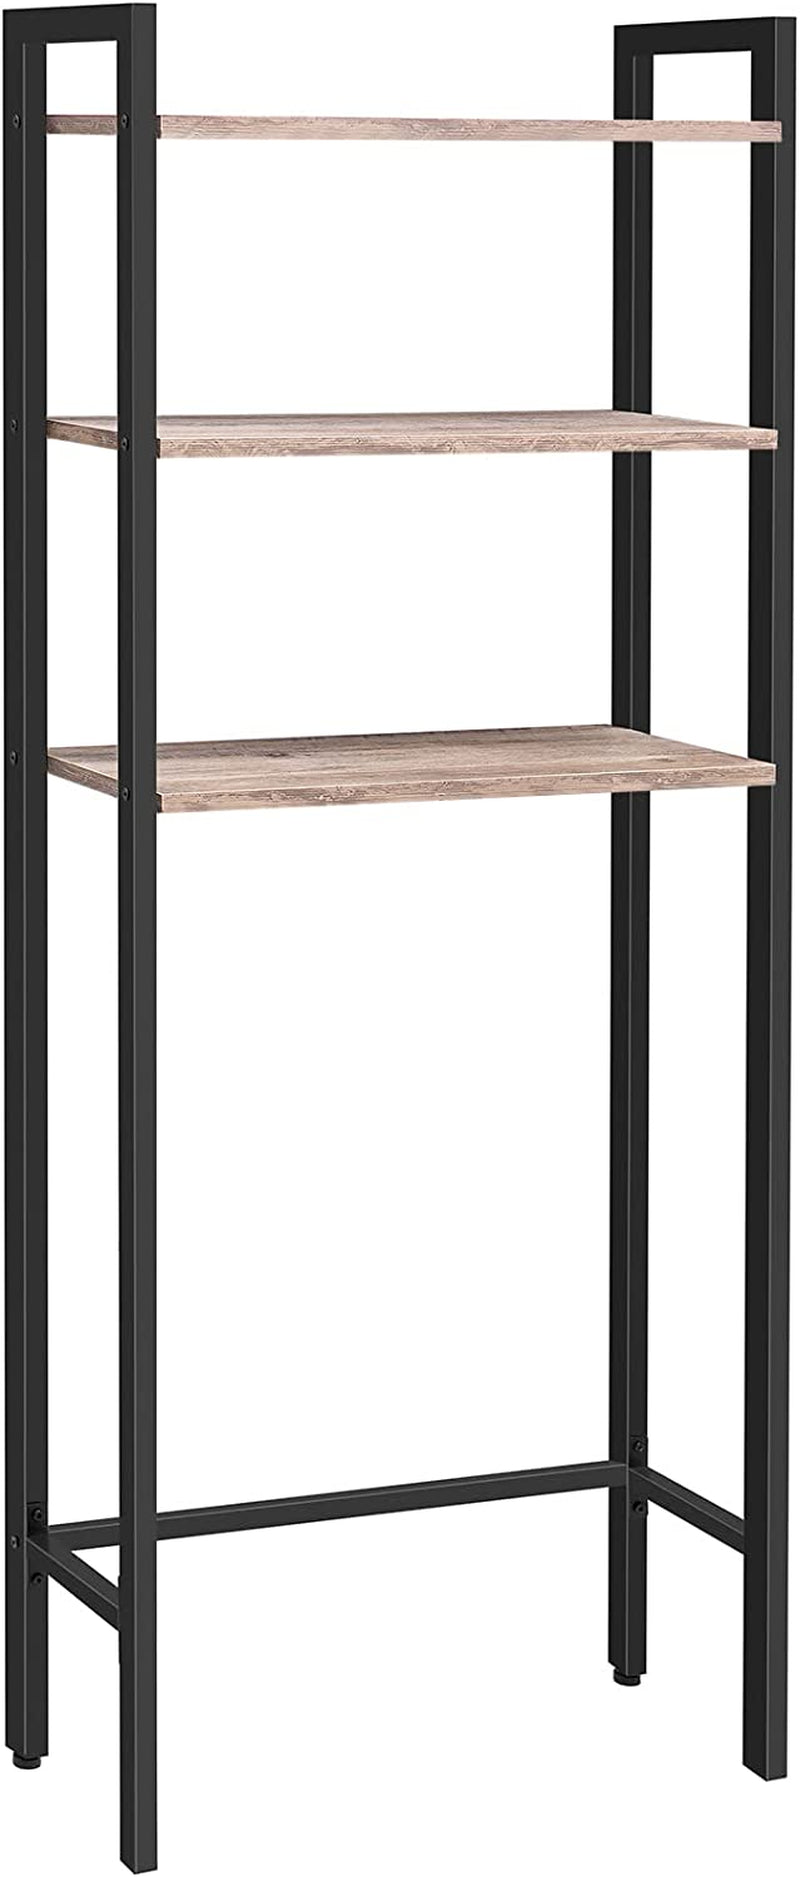 HOOBRO over the Toilet Storage, 3-Tier Industrial over Toilet Bathroom Organizer, Bathroom Shelves over Toilet with Adjustable Feet, Easy to Assembly, Rustic Brown BF41TS01 Home & Garden > Household Supplies > Storage & Organization HOOBRO Greige + Black  